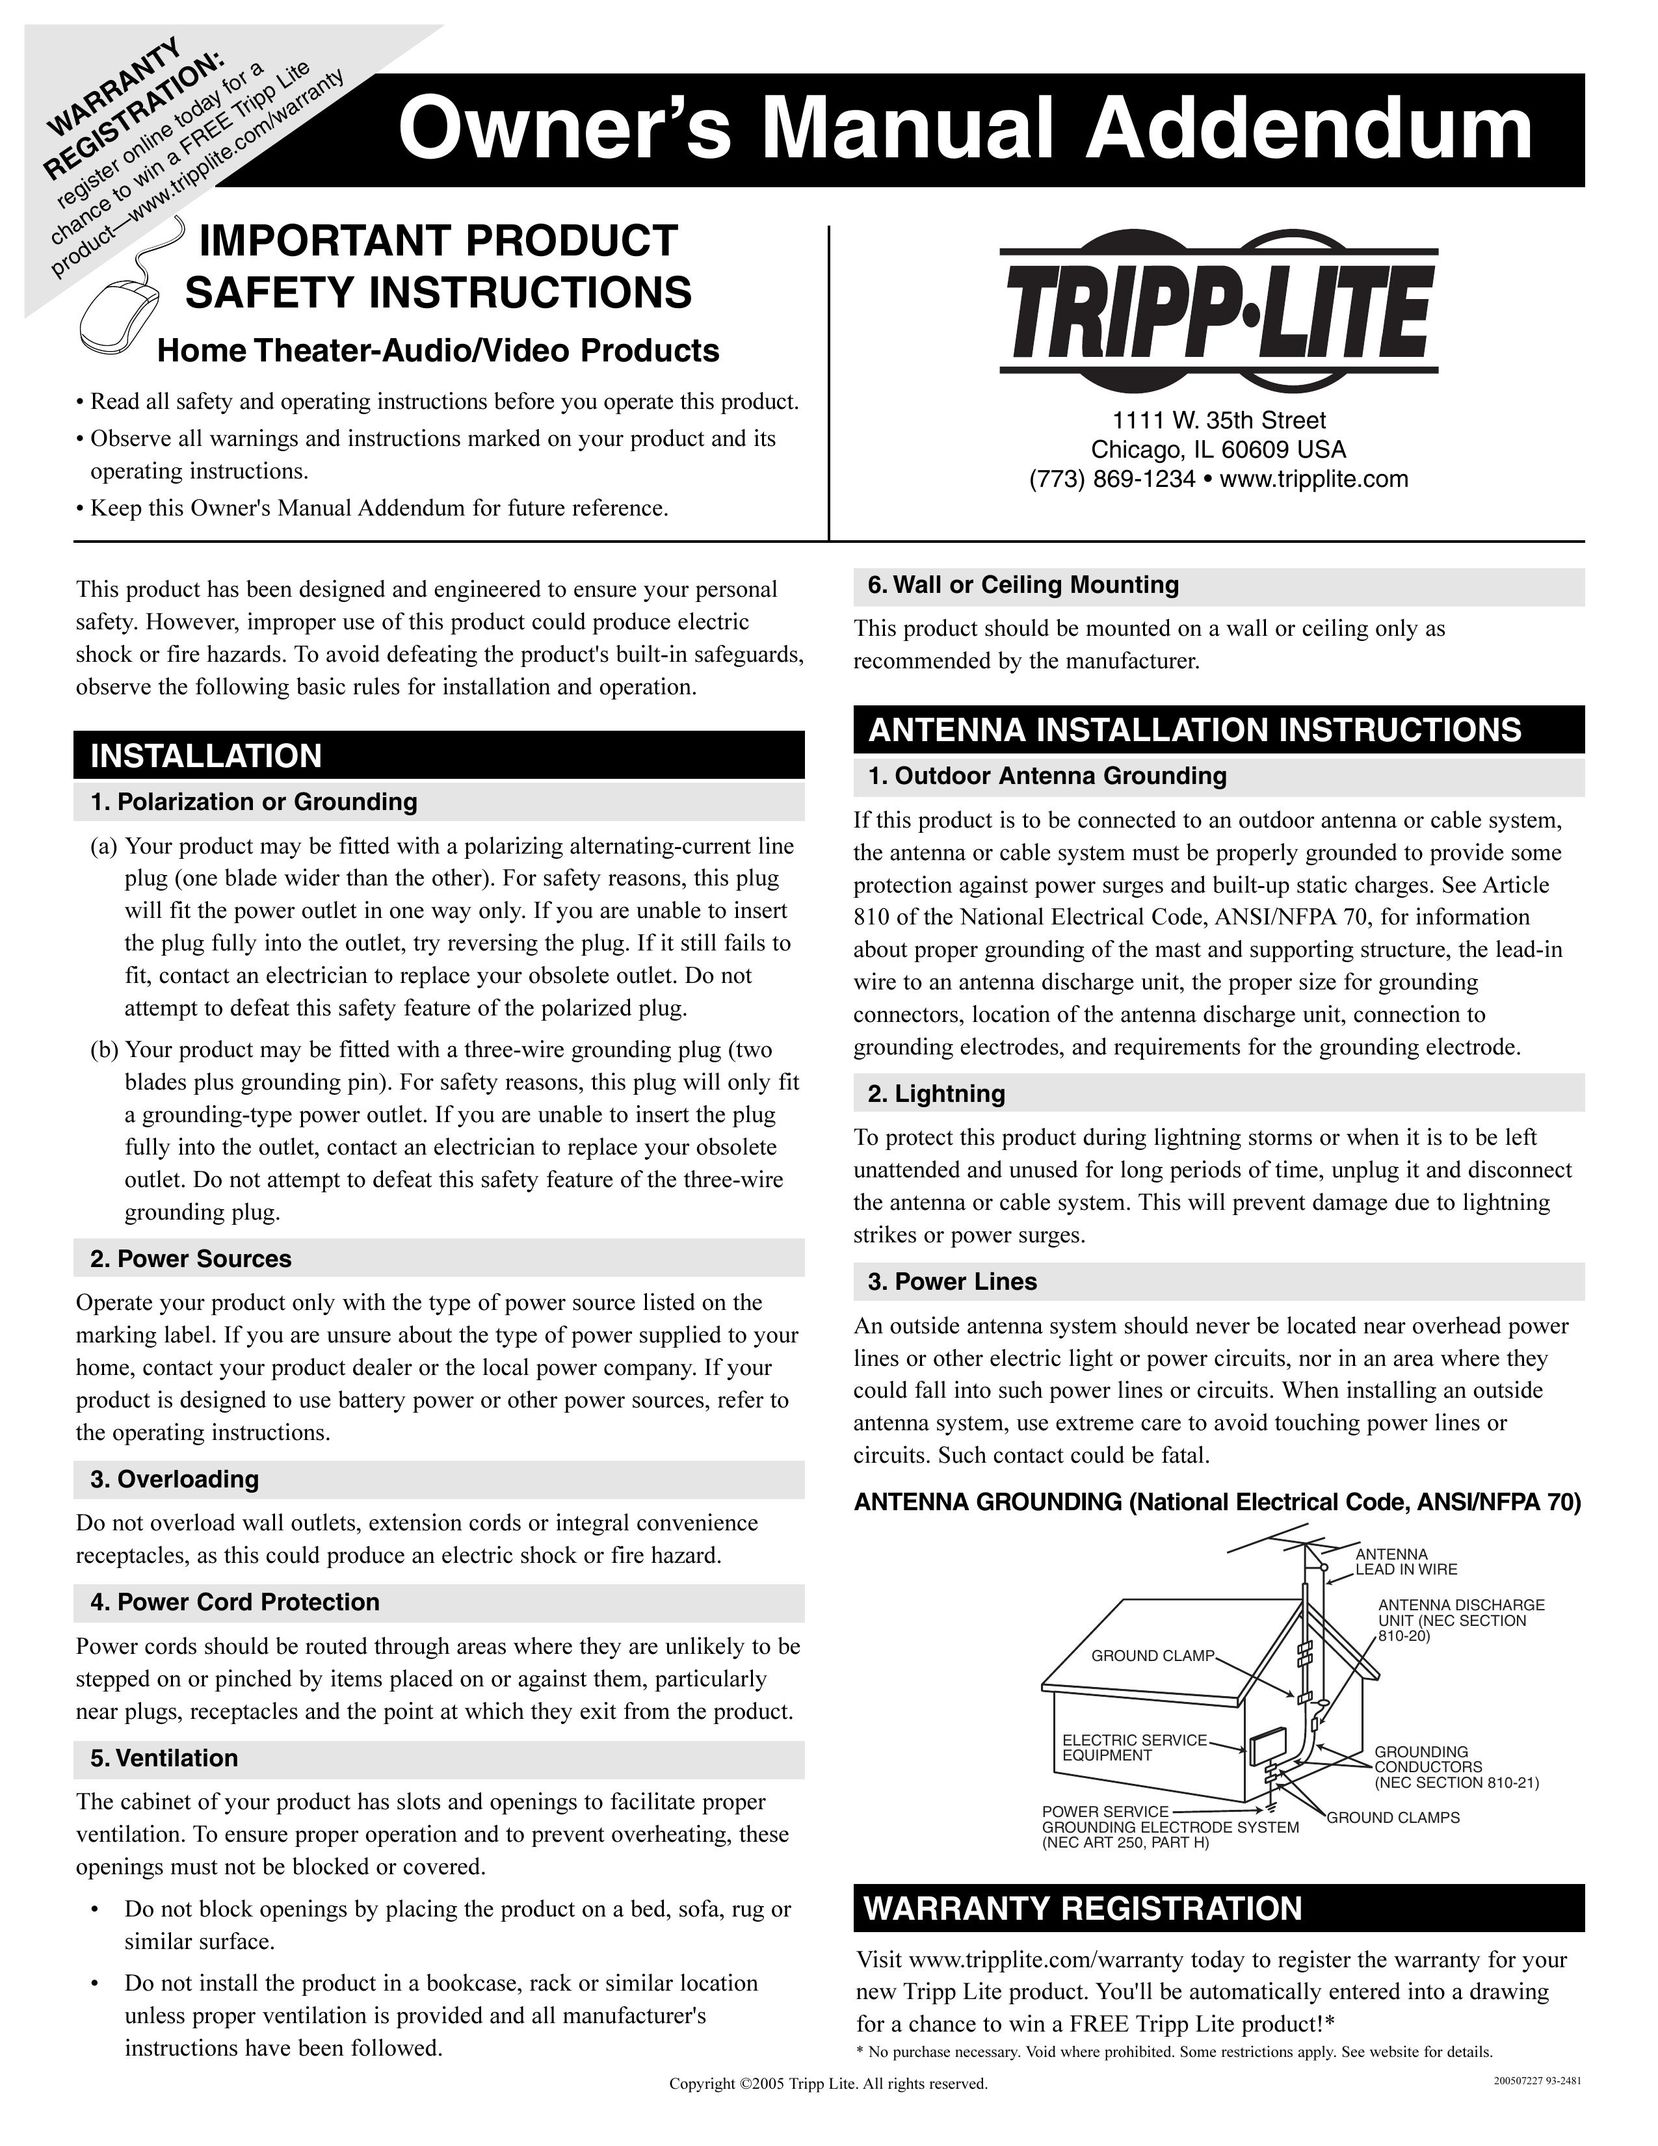 Tripp Lite Home Theater-Audio/Video Products Home Theater System User Manual